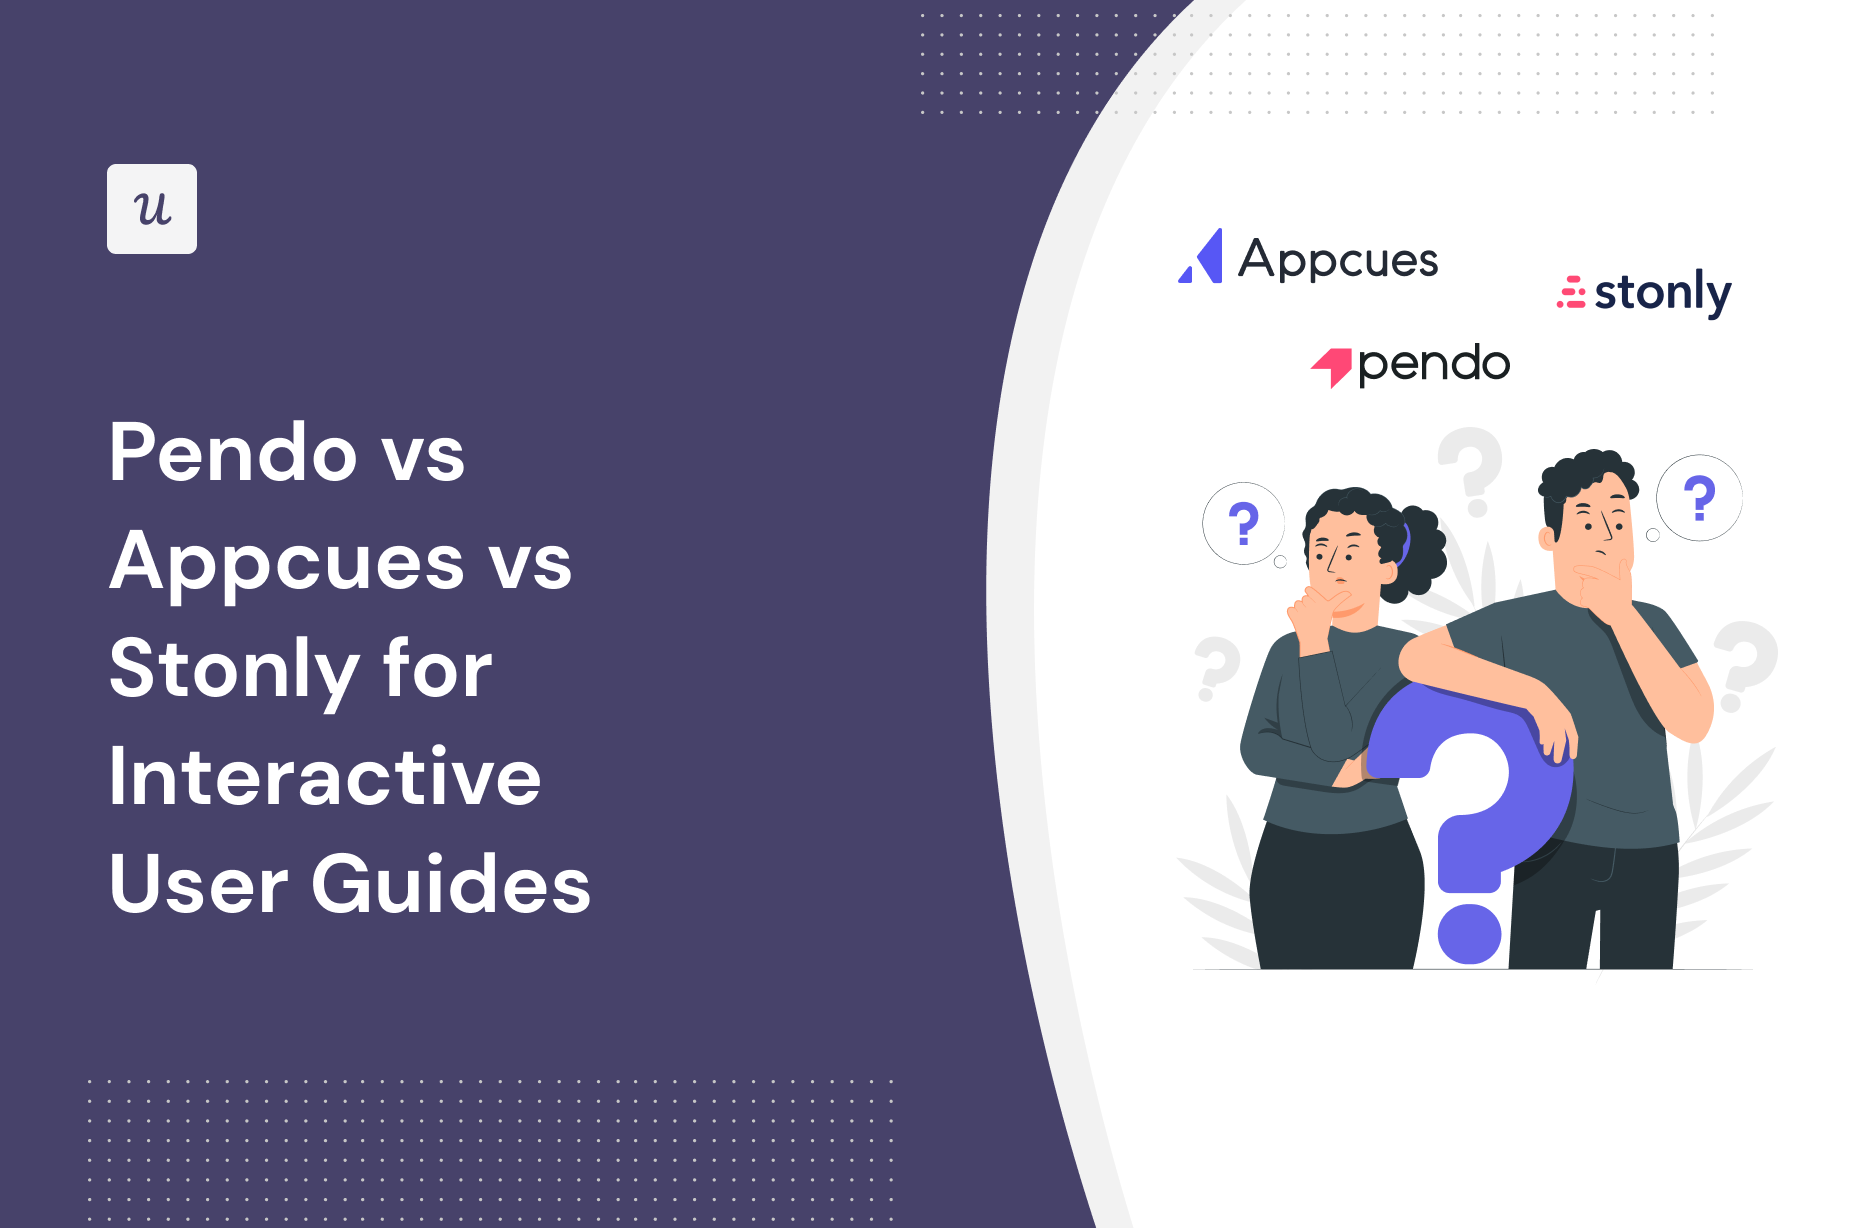 Pendo vs Appcues vs Stonly for Interactive User Guides